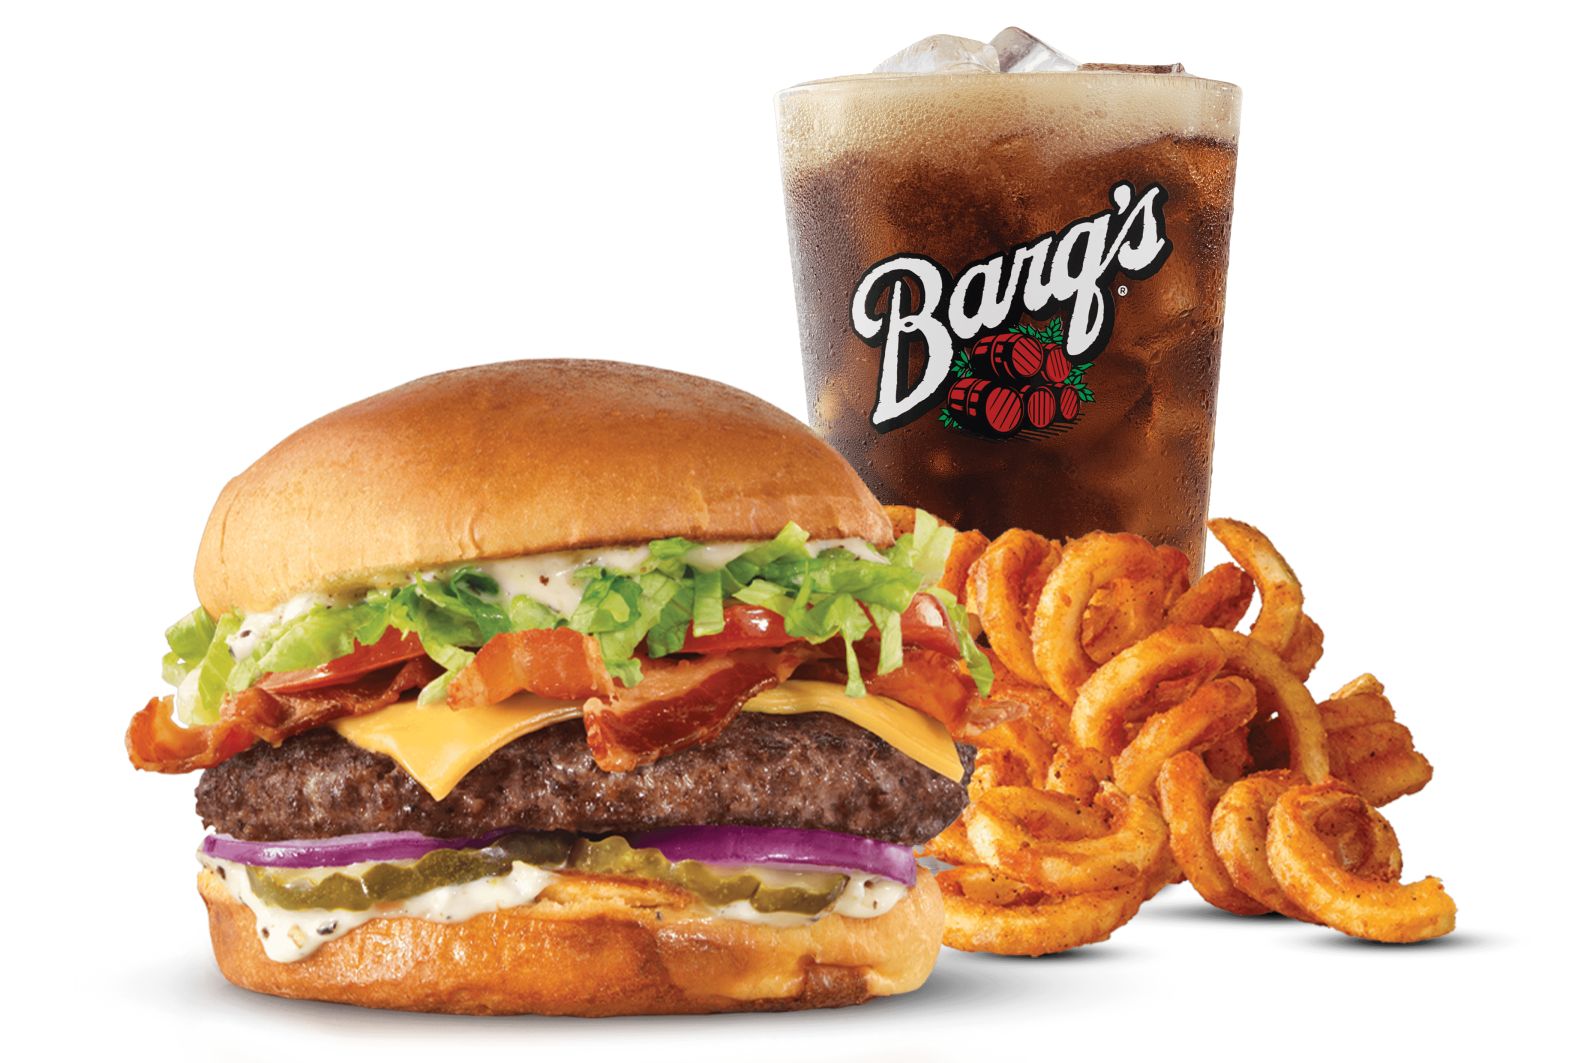 The New Bacon Ranch Wagyu Steakhouse Burger Now Joins the Menu for a Short Time at Arby's